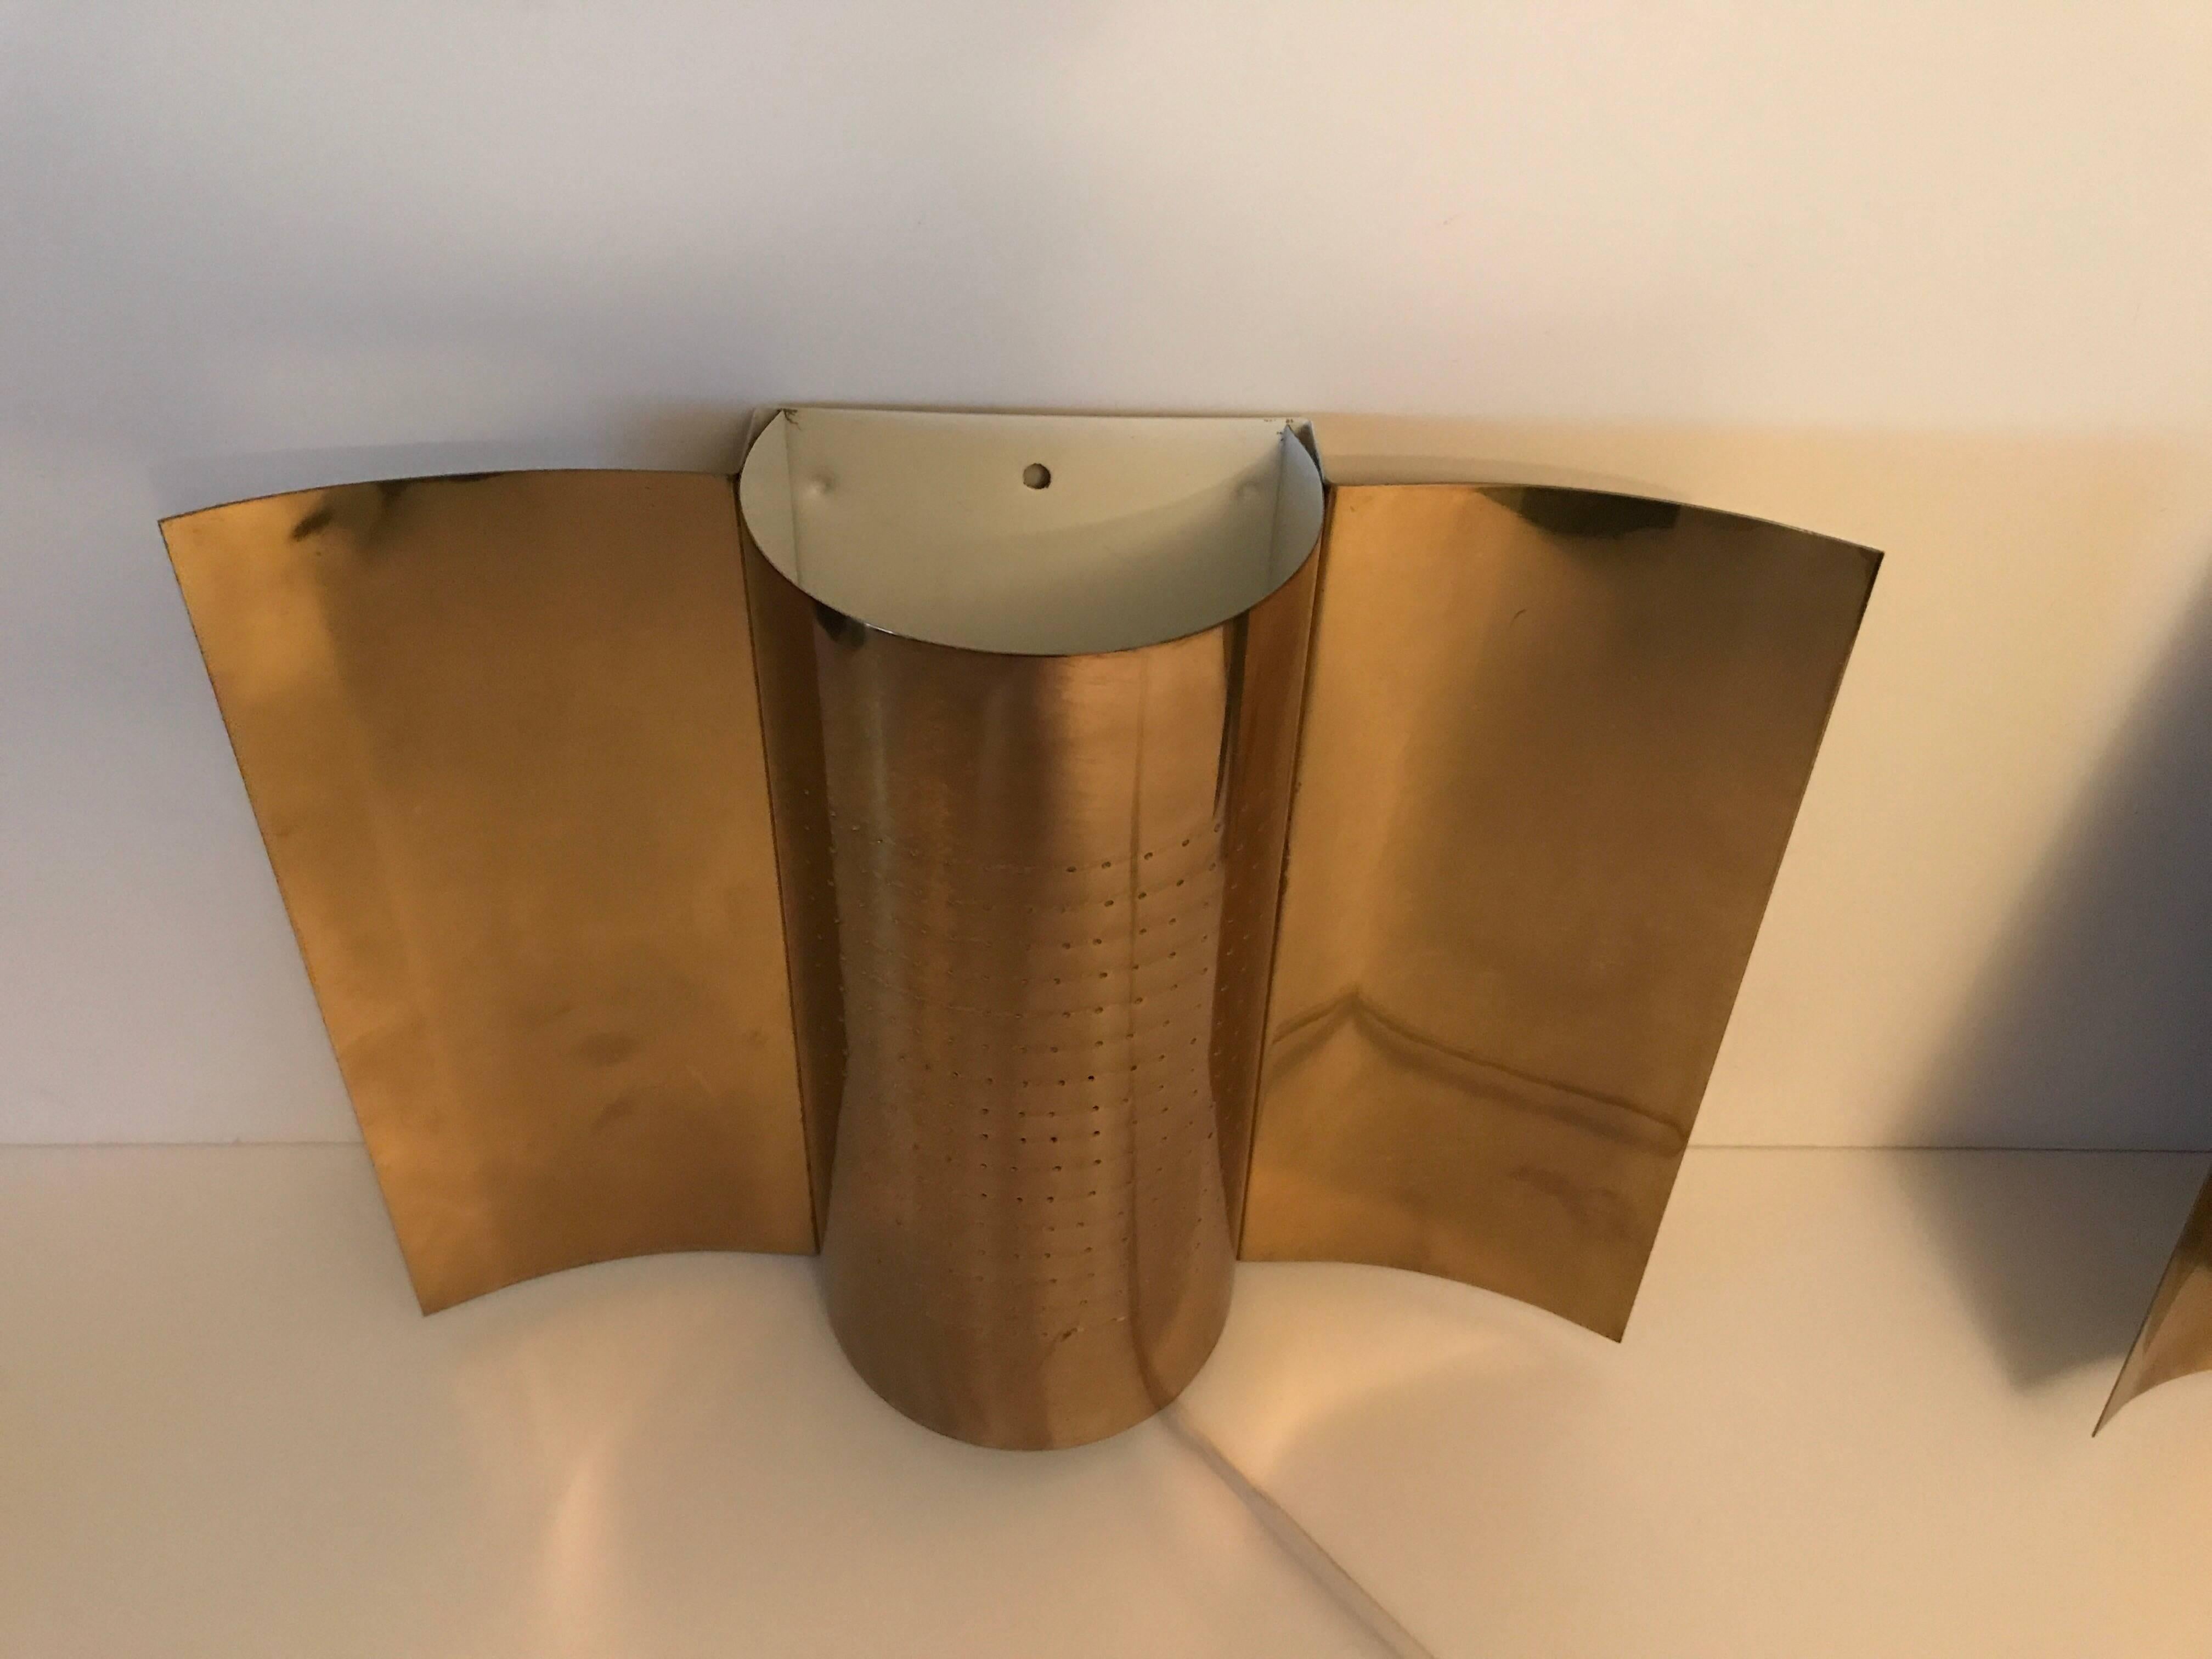 Rare pair of Swedish brass wall lamps or wall sconces made by Hemi, circa 1960.
A fabulous pair of perforated brass wall sconces by Hemi Belysning. They measure 33cm in width, 25cm in height and they come out 10.5cm from the wall. The light that